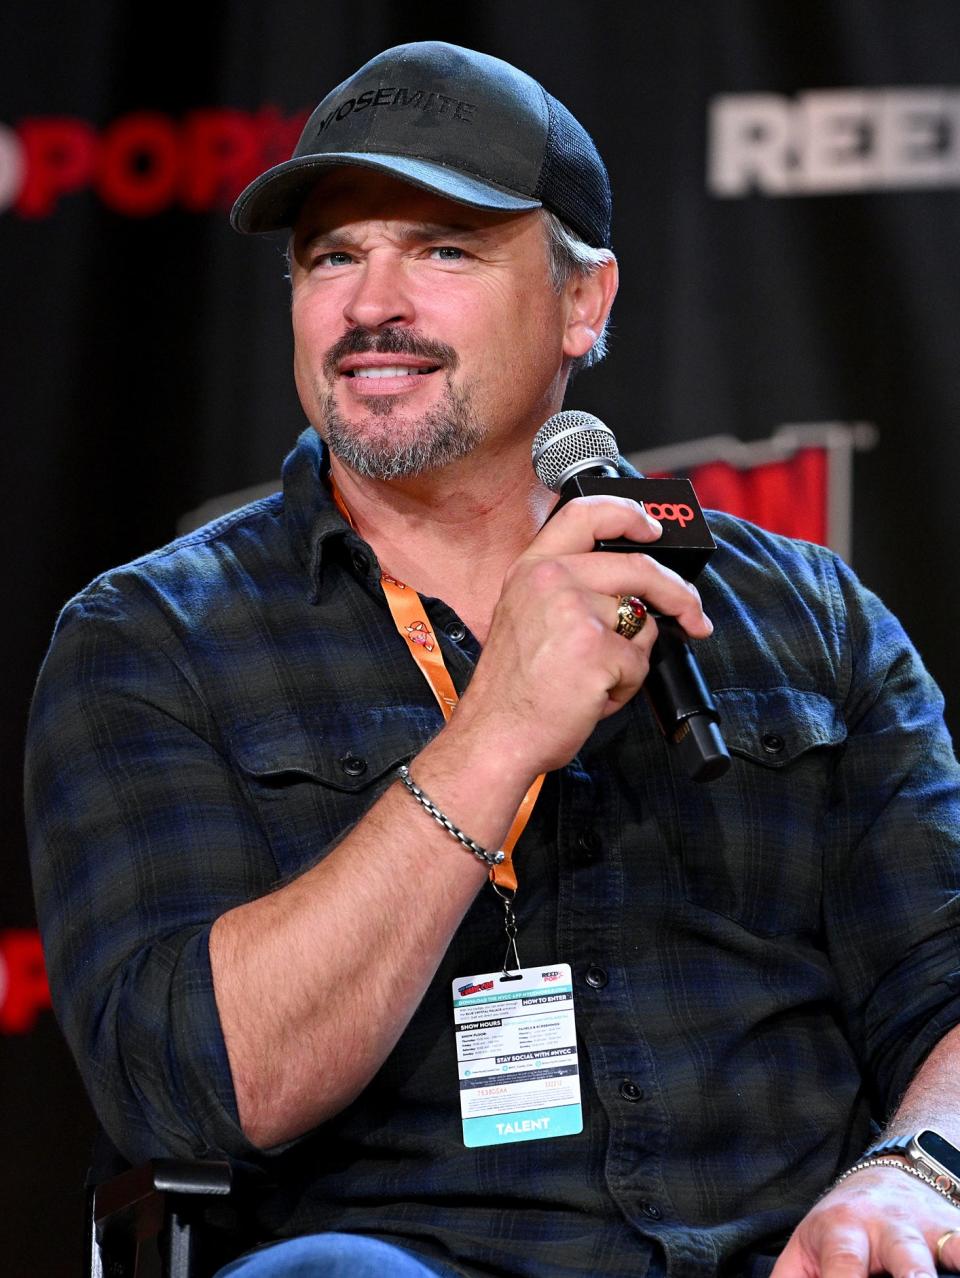 holding a mic on stage wearing a cap with a greying goatee